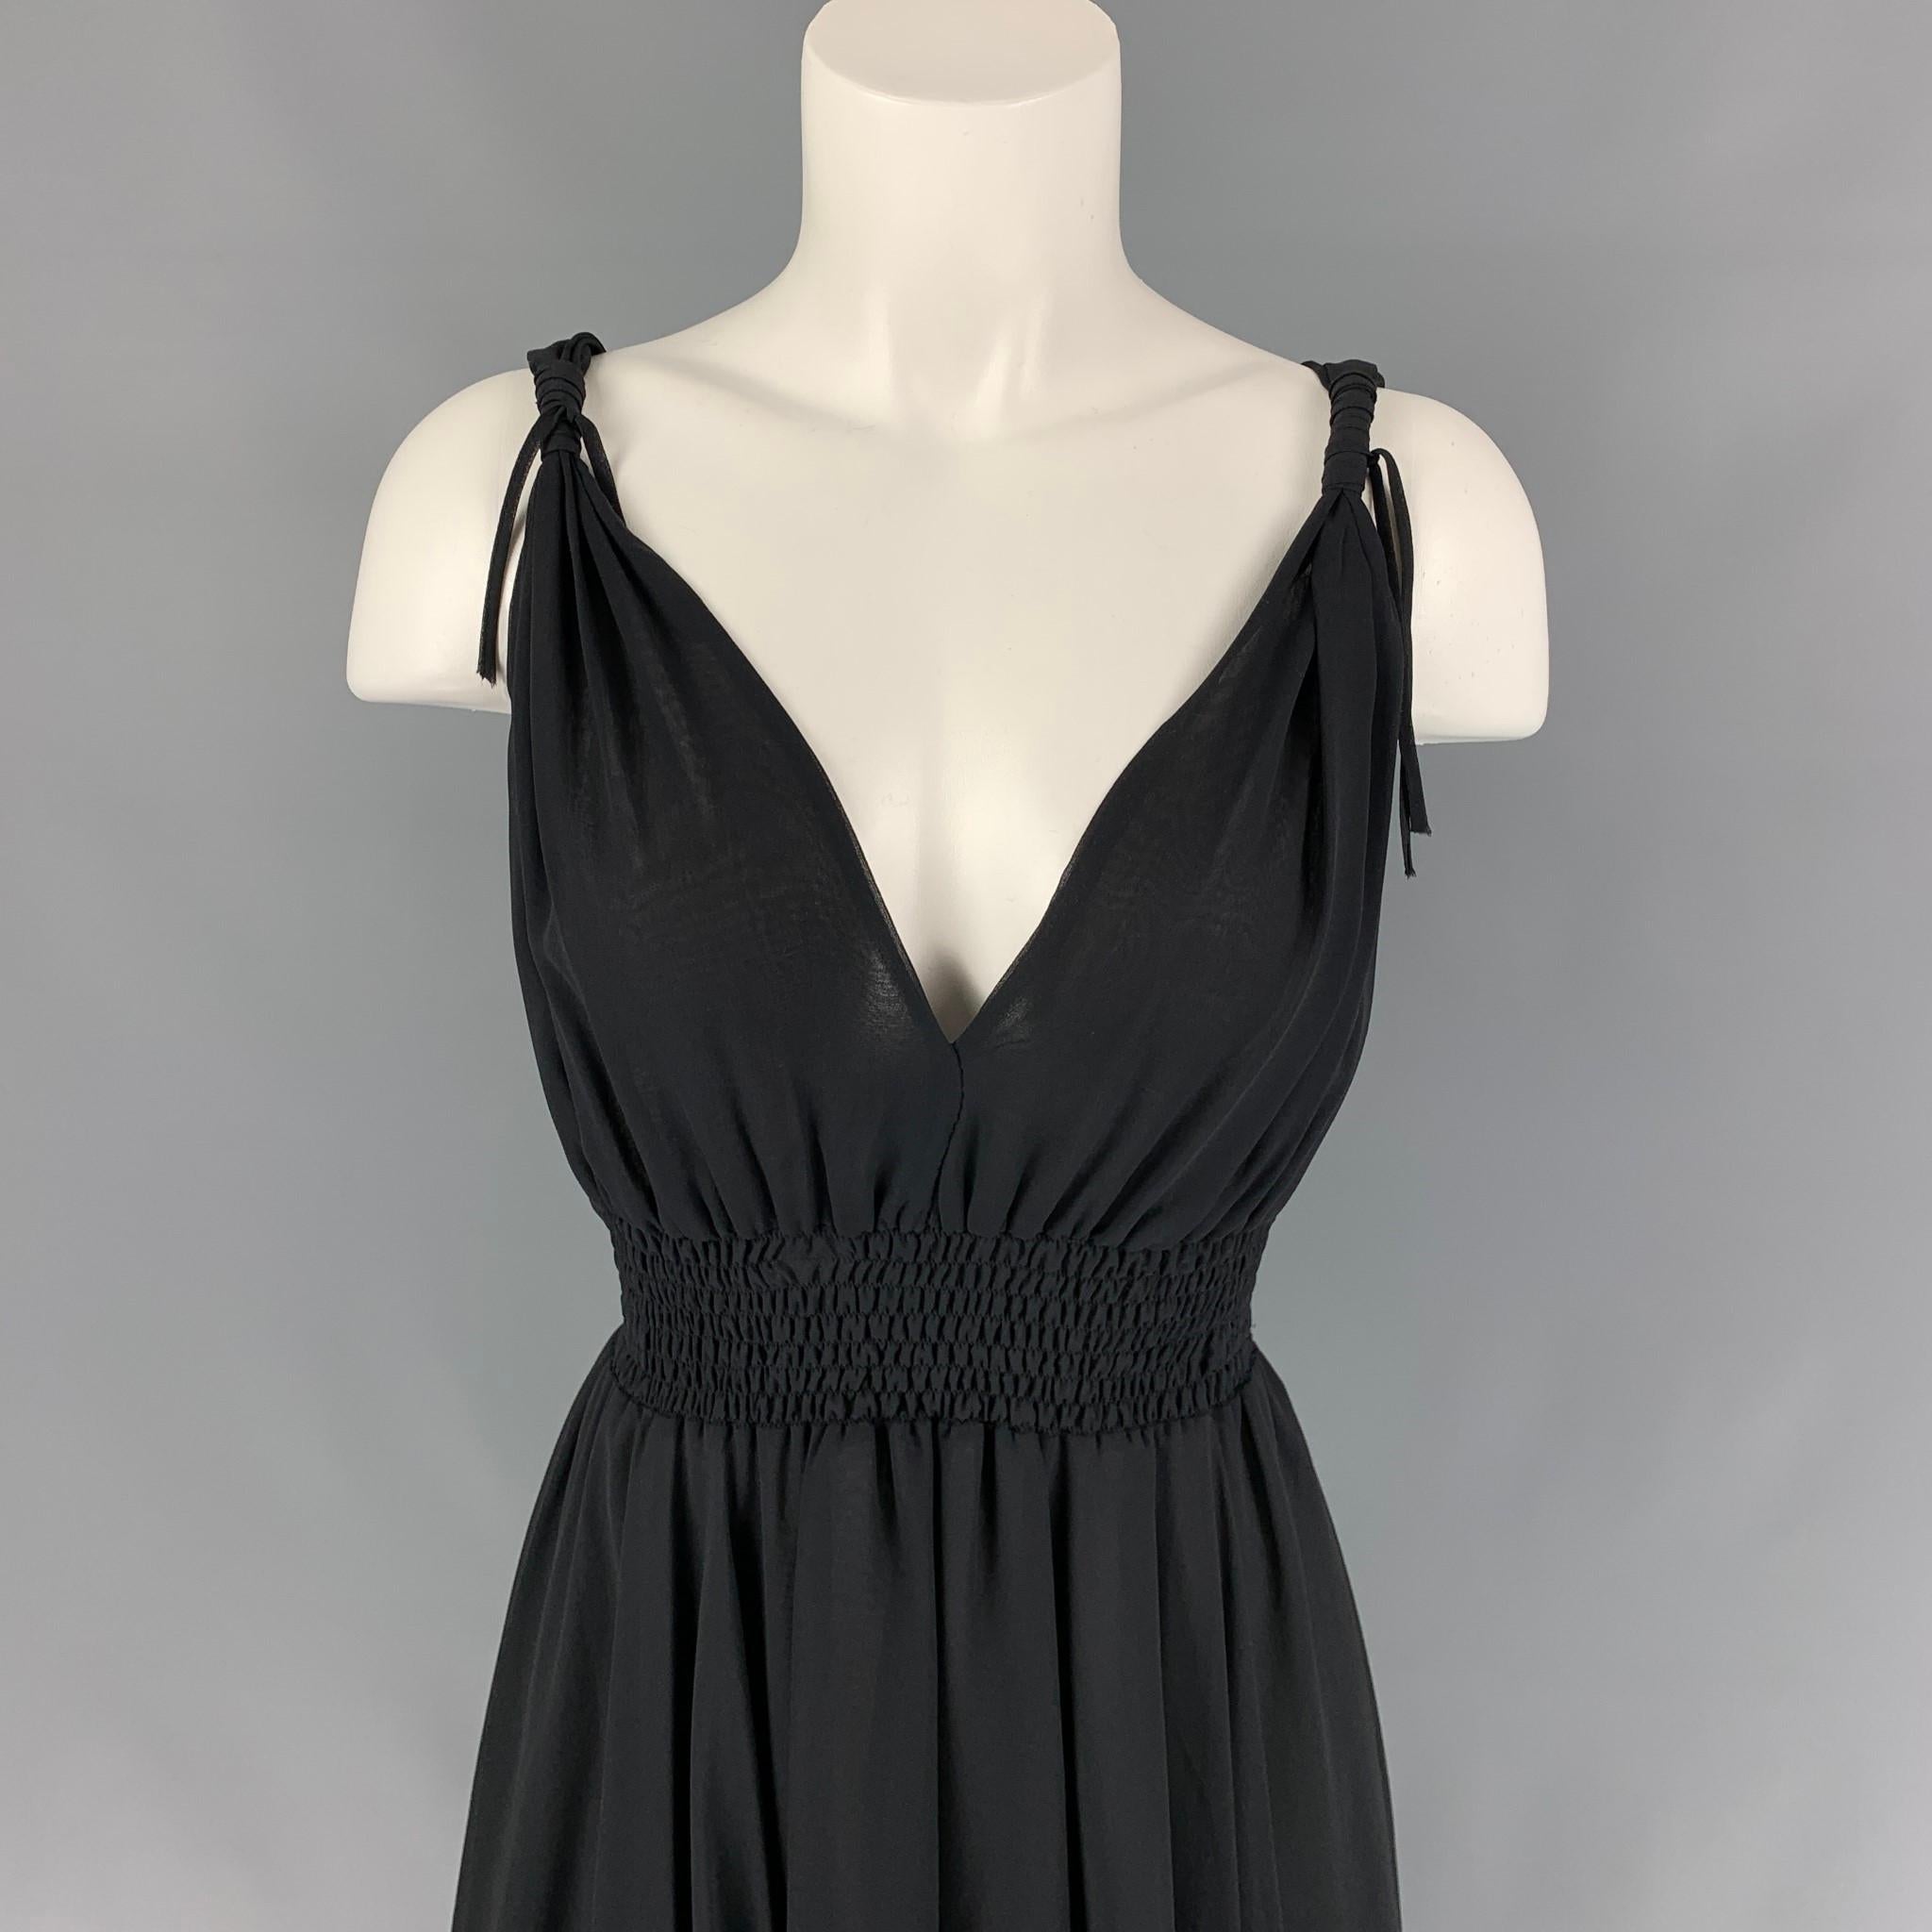 JOHN RICHMOND dress comes in a black chiffon material featuring an a-line style, elastic waist, and knotted strap details. 

Very Good Pre-Owned Condition. Fabric tag removed.
Marked: Size tag removed.

Measurements:

Bust: 28 in.
Waist: 22 in.
Hip: